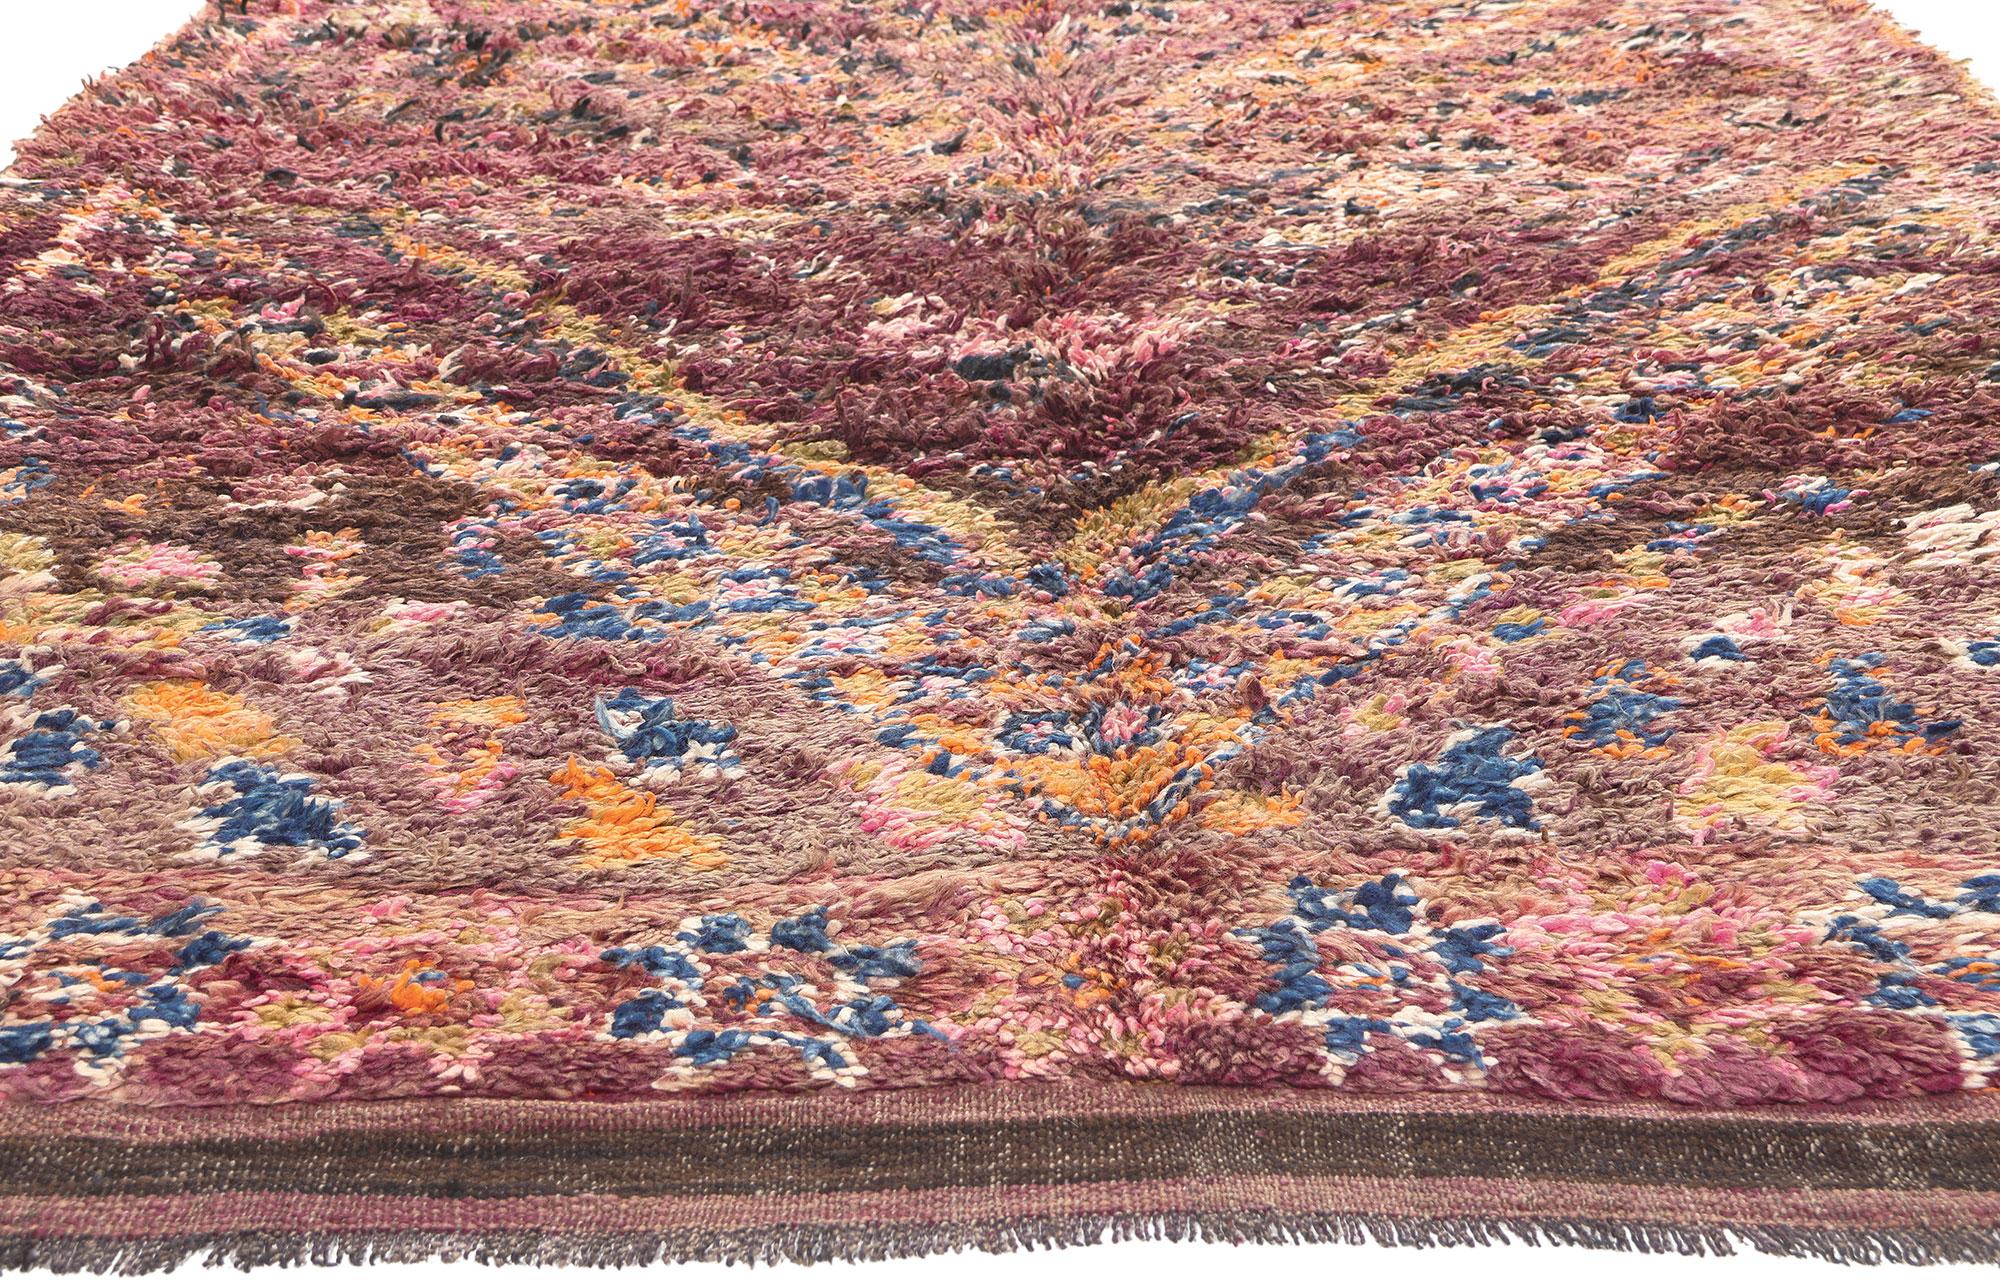 Hand-Knotted Vintage Purple Beni MGuild Moroccan Rug, Boho Chic Meets Midcentury Modern For Sale